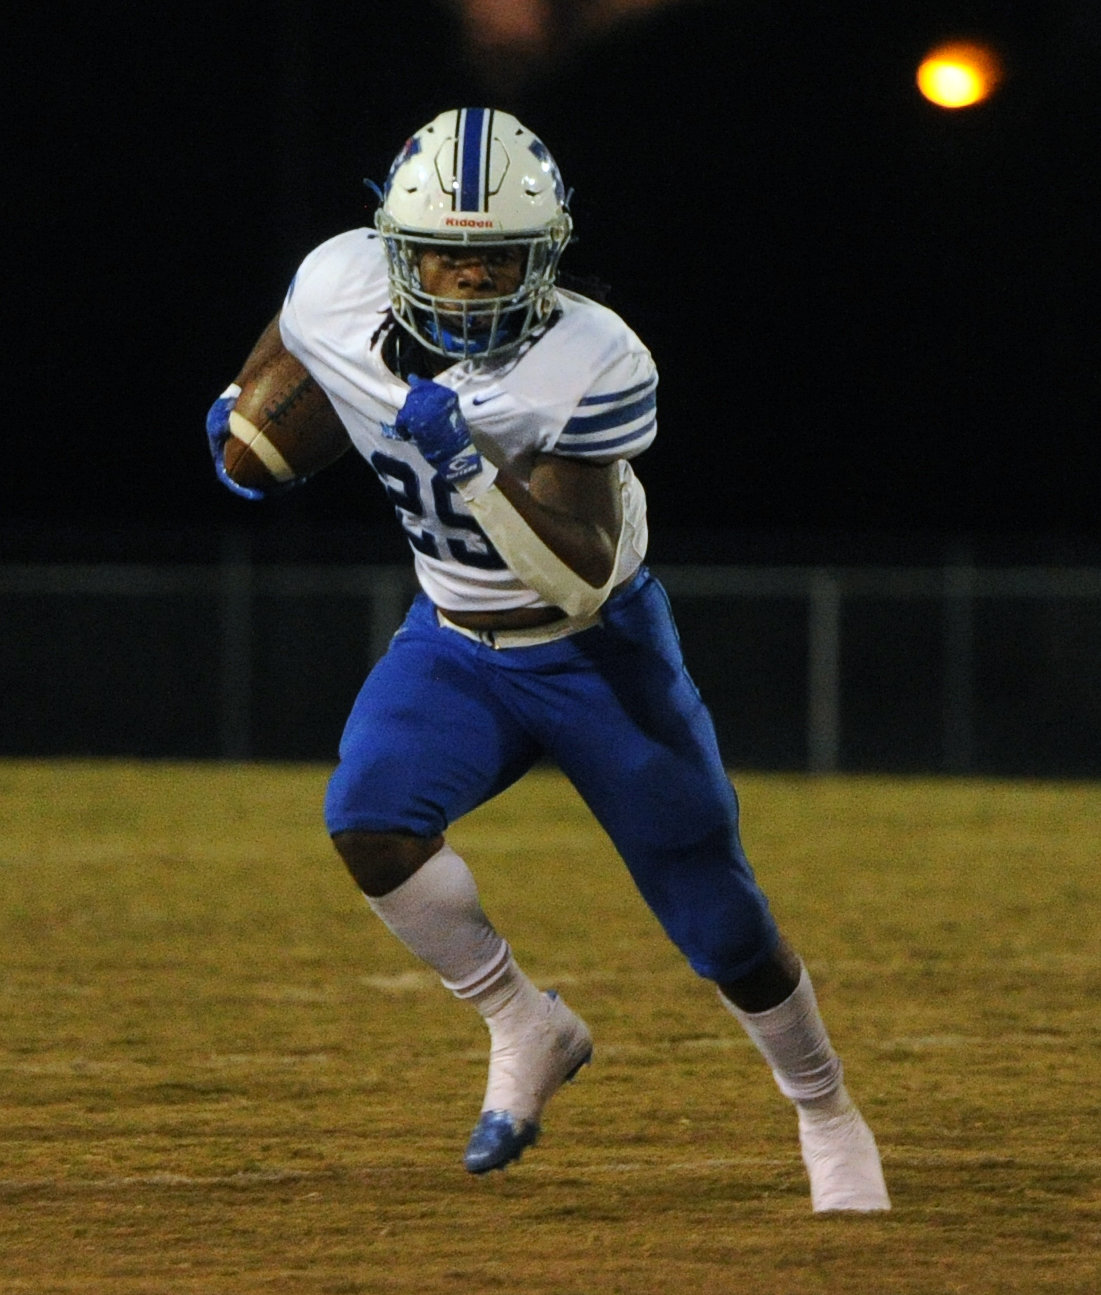 Demari Braden totaled 49 yards on six carries and a pair of scores against Glencliff.